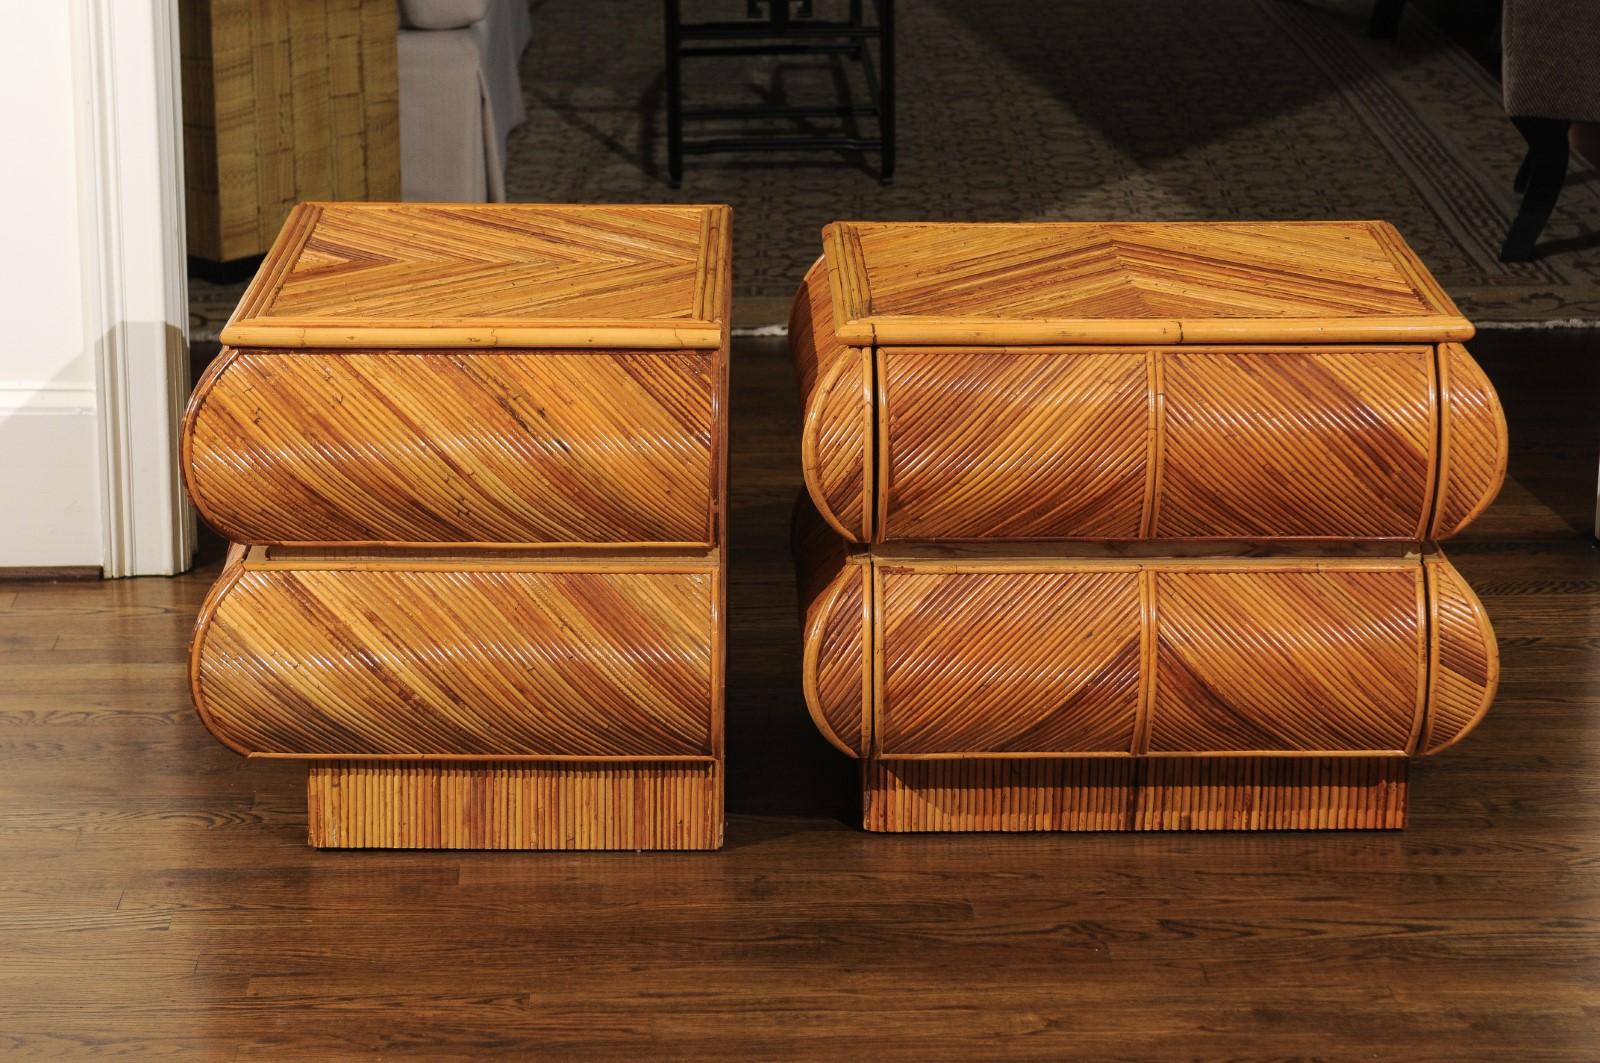 Magnificent Restored Pair of Bullnose Small Chests in Bamboo, circa 1980 For Sale 4